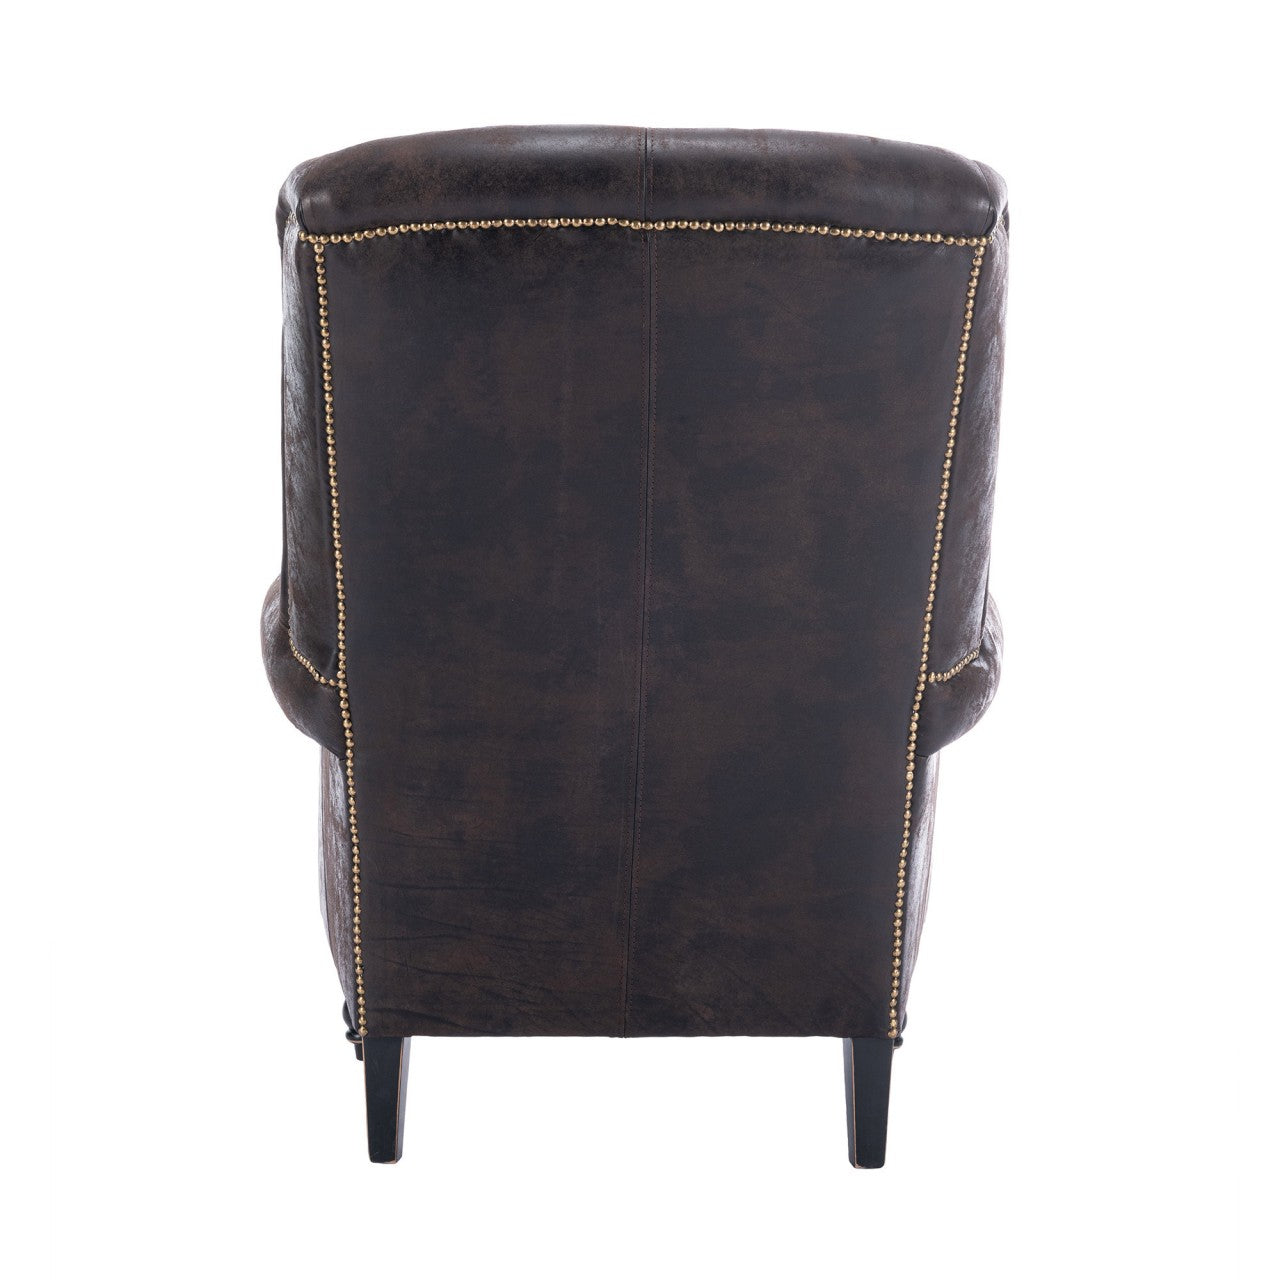 BRYANT WING CHAIR (Leather)_Furniture_Mindthegap